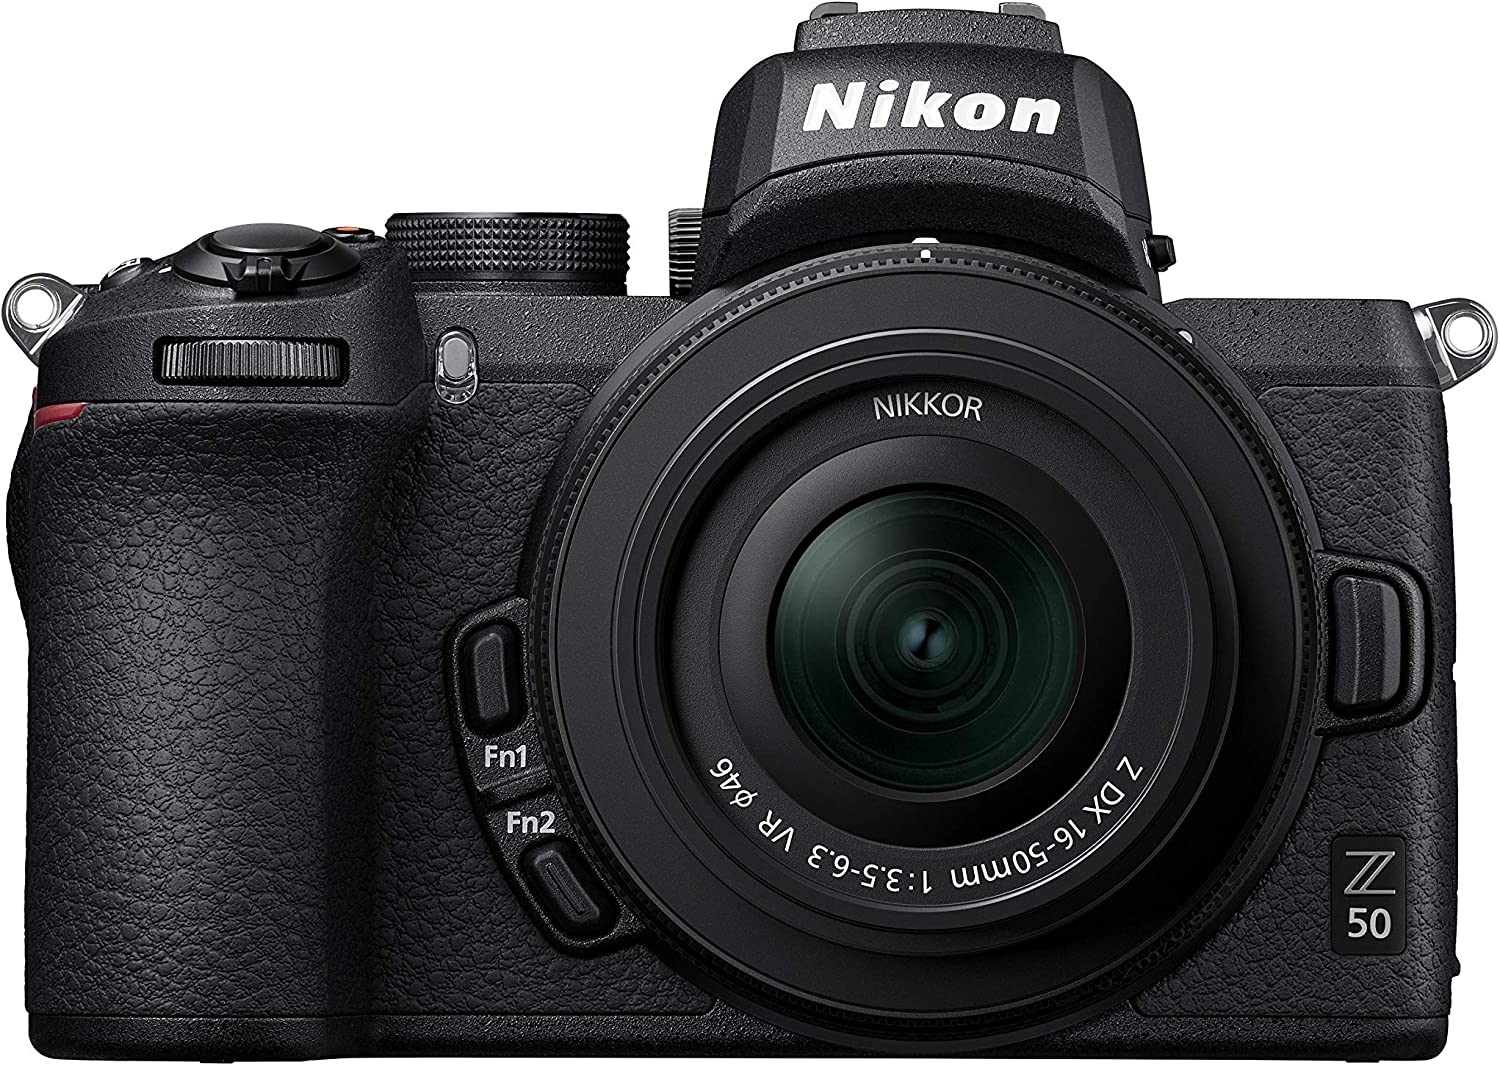 Nikon Z50 Digital Mirrorless Camera with 16-50mm and 50-250mm Lenses (Twin Kit)